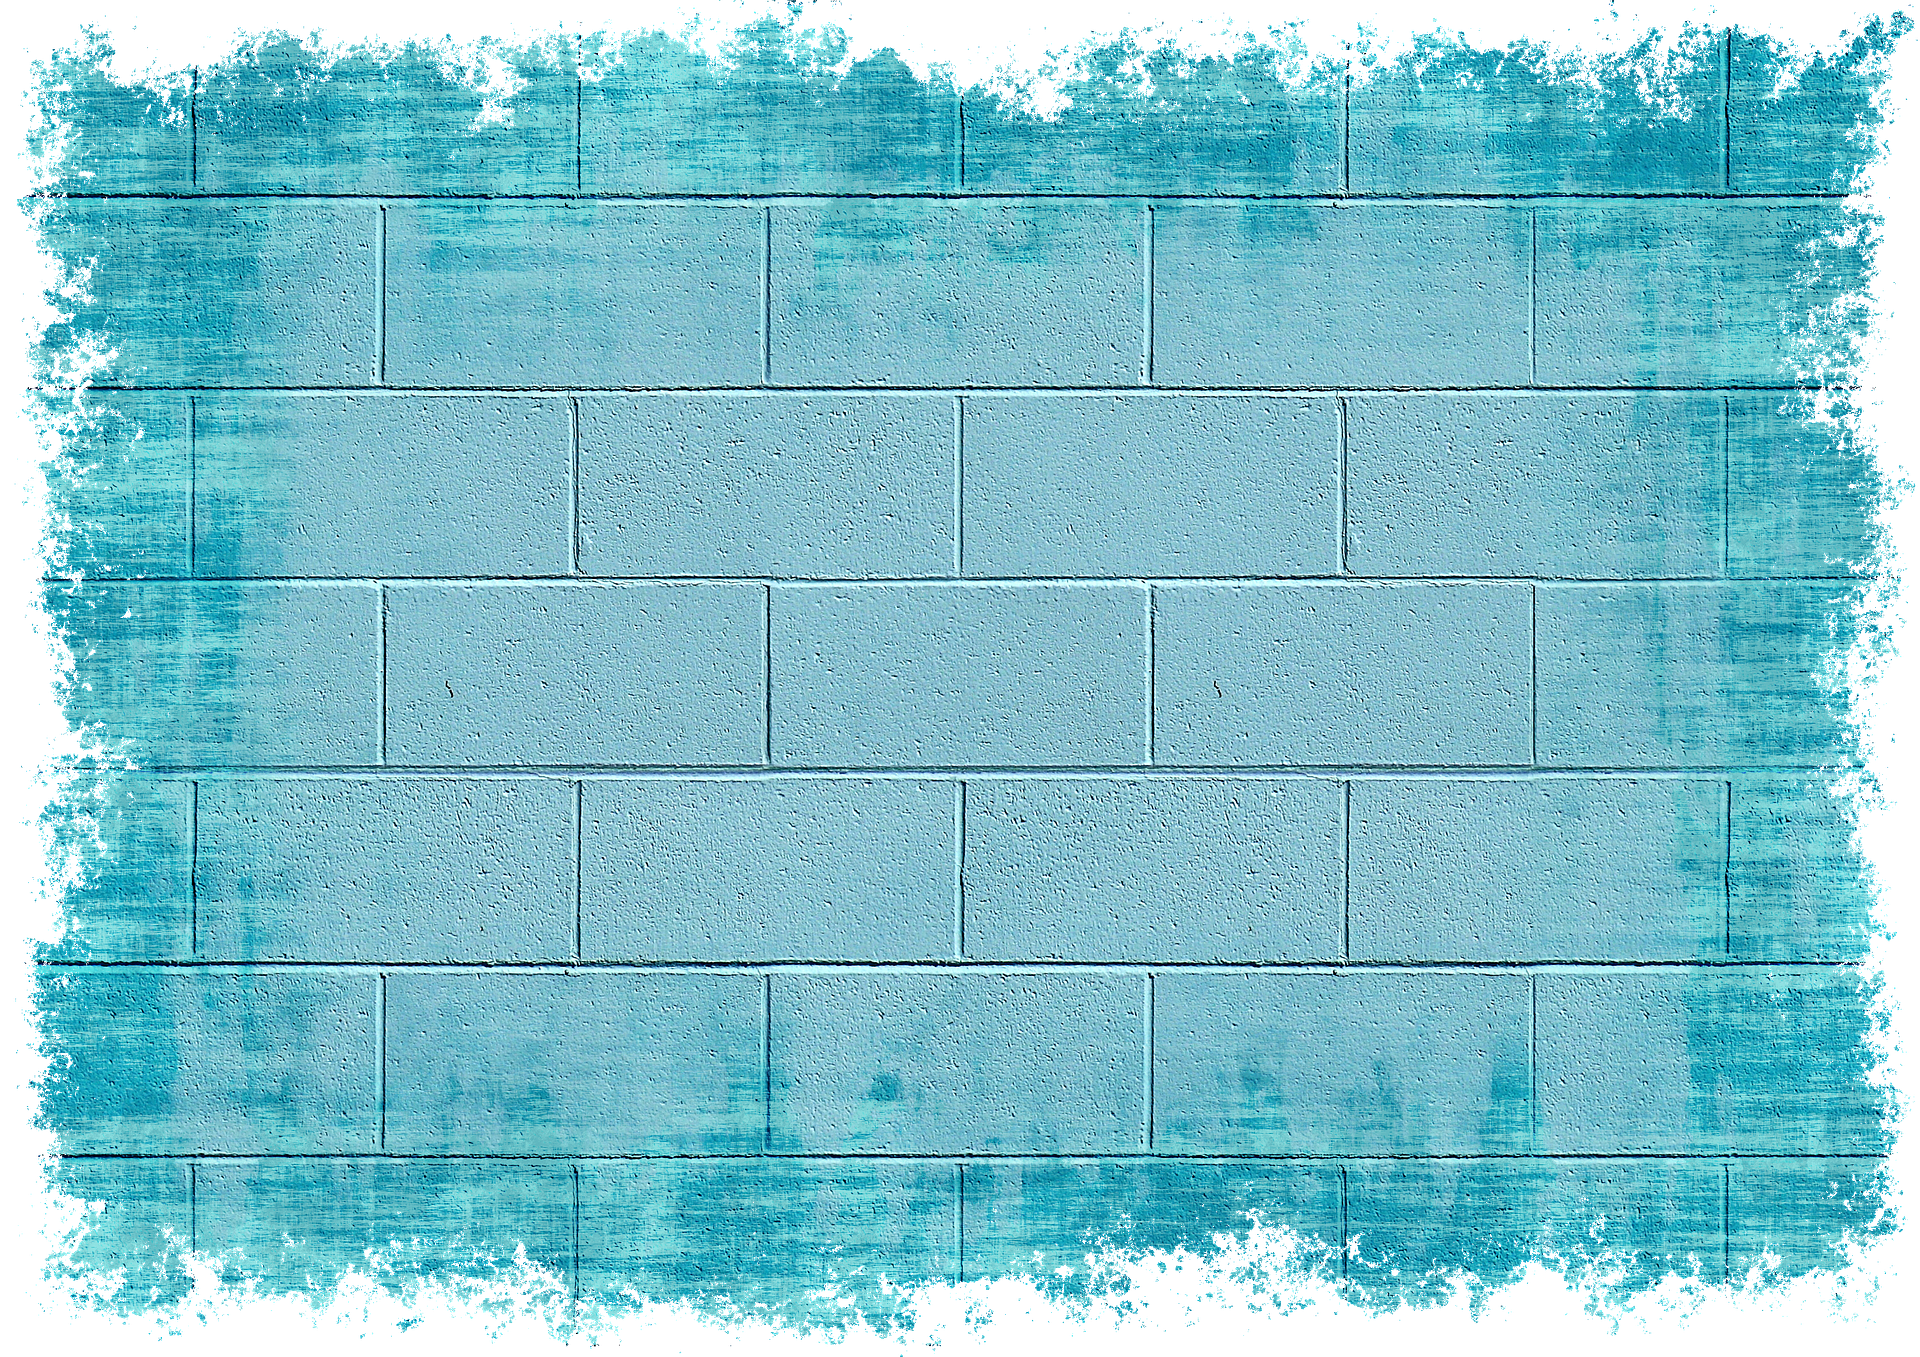 Painted Blue Bricks Wall | Photo Texture & Background